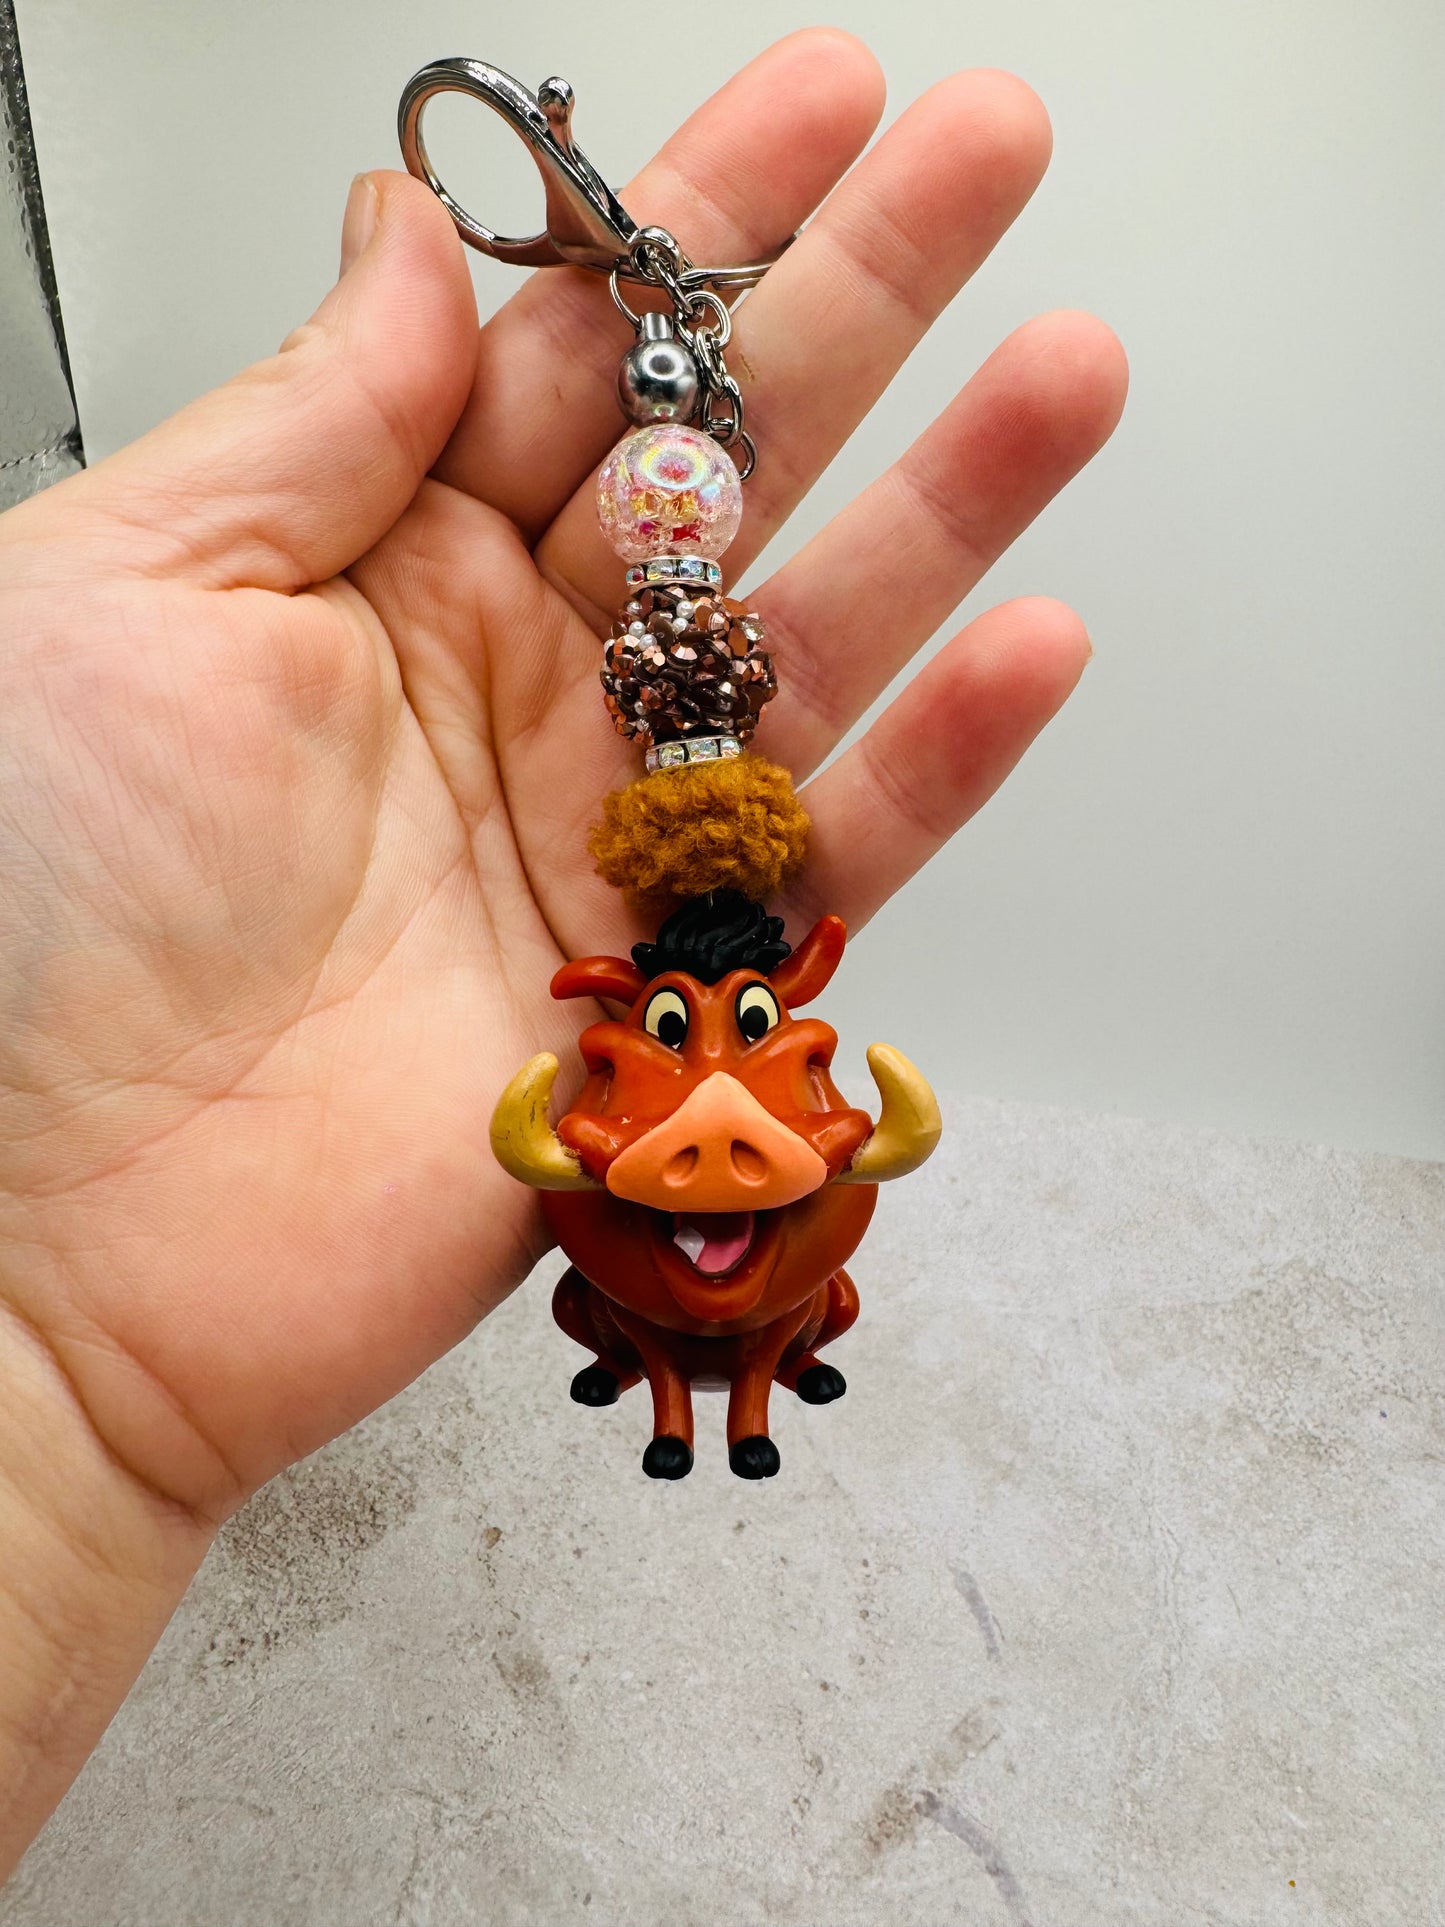 Specialty Character Keychains